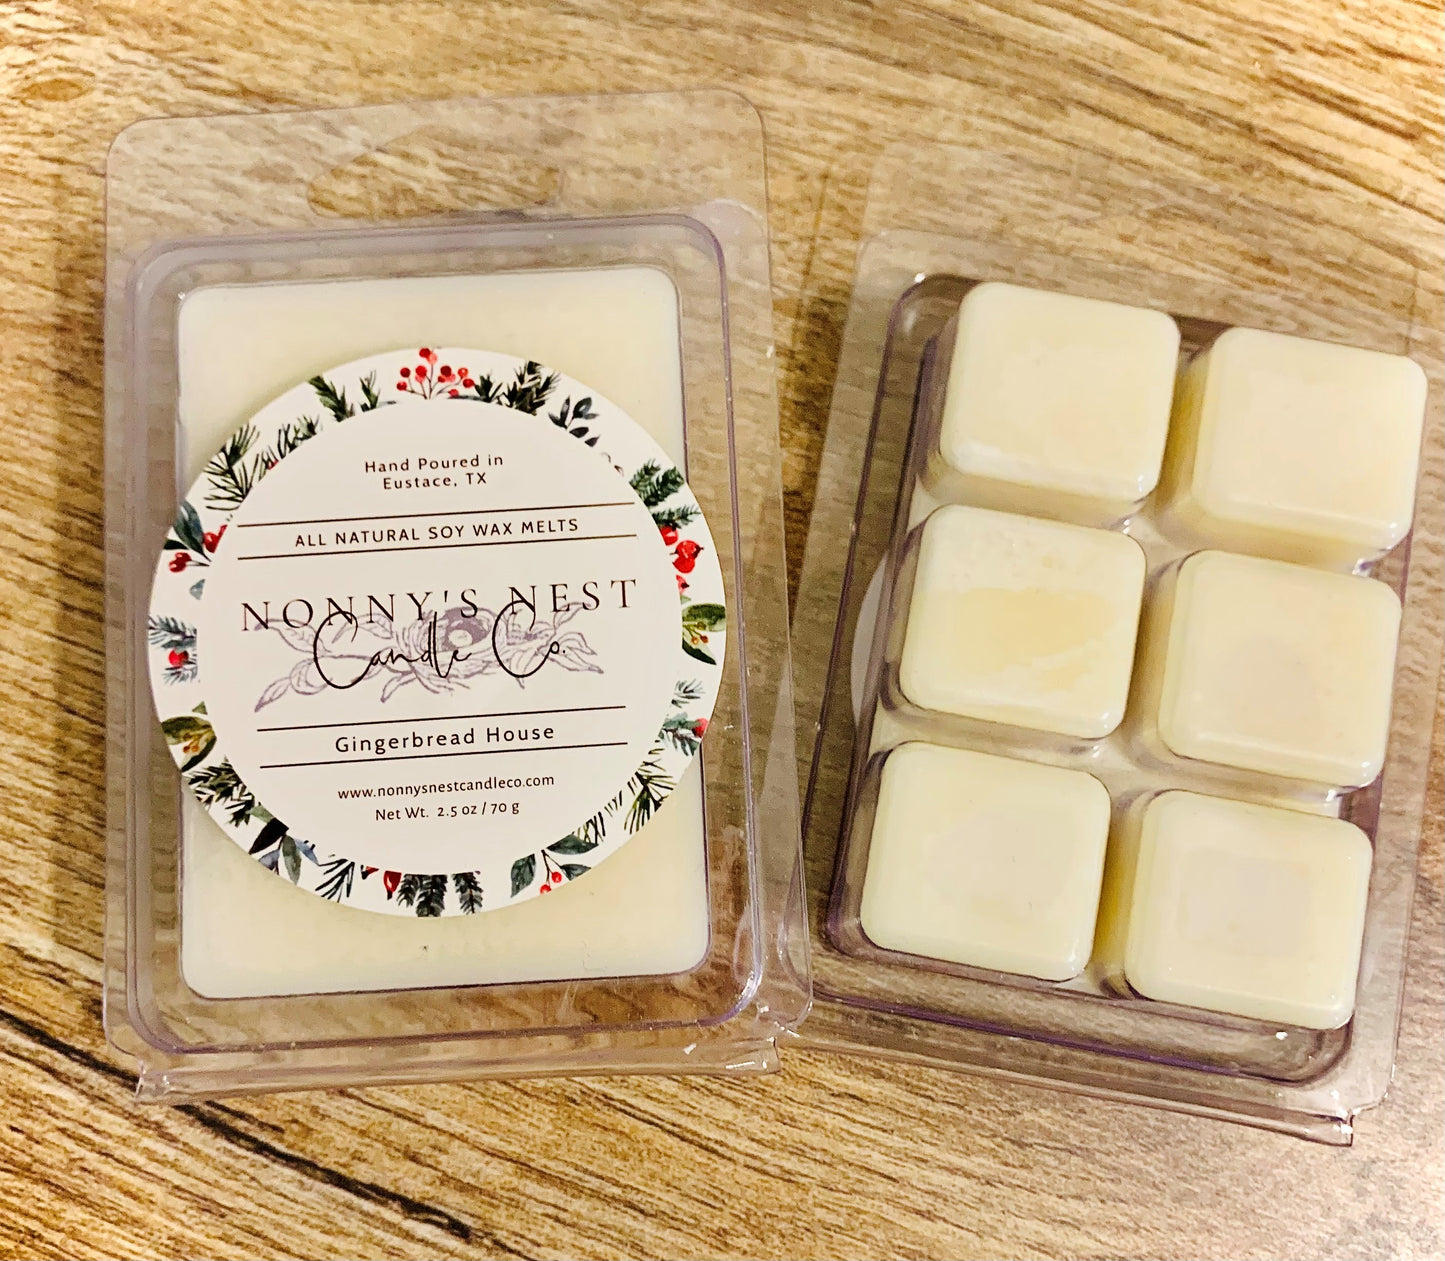 Gingerbread House Soy Wax Melts (Clamshell)